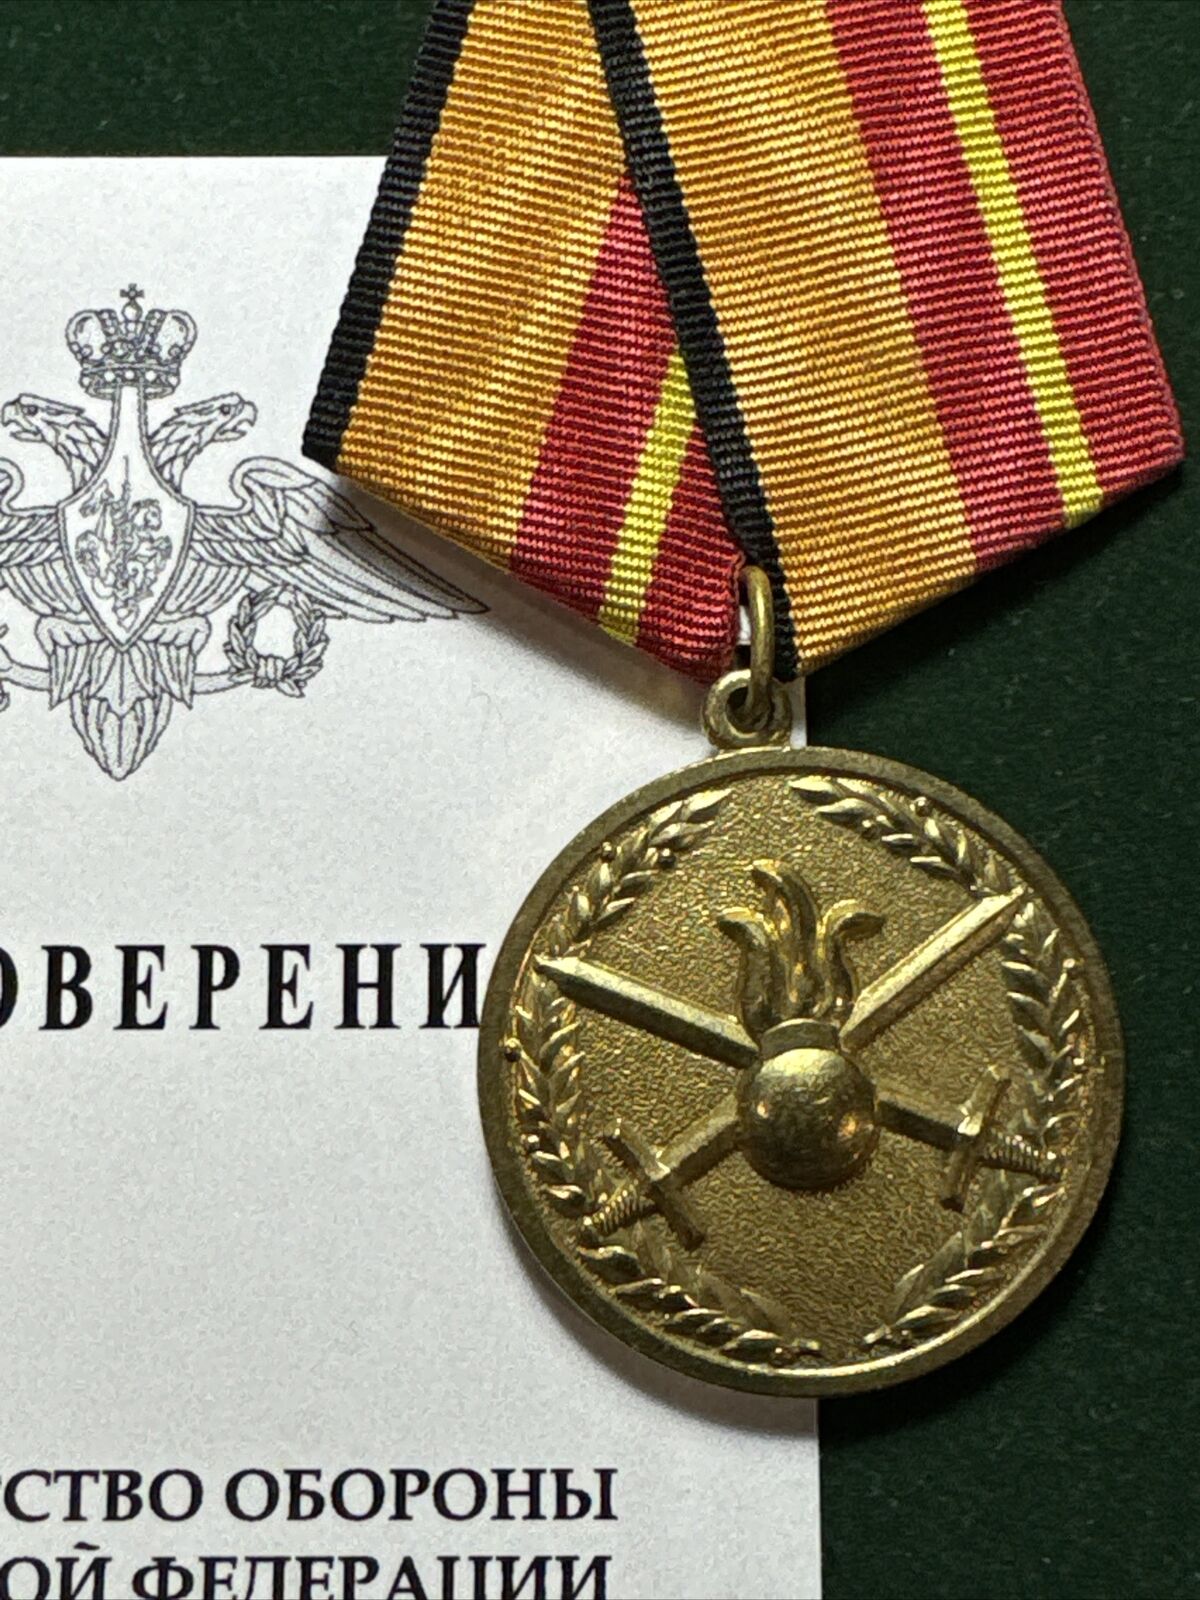 Russian Federation Award Medal For DISTINCTION In Service in Ground Forces